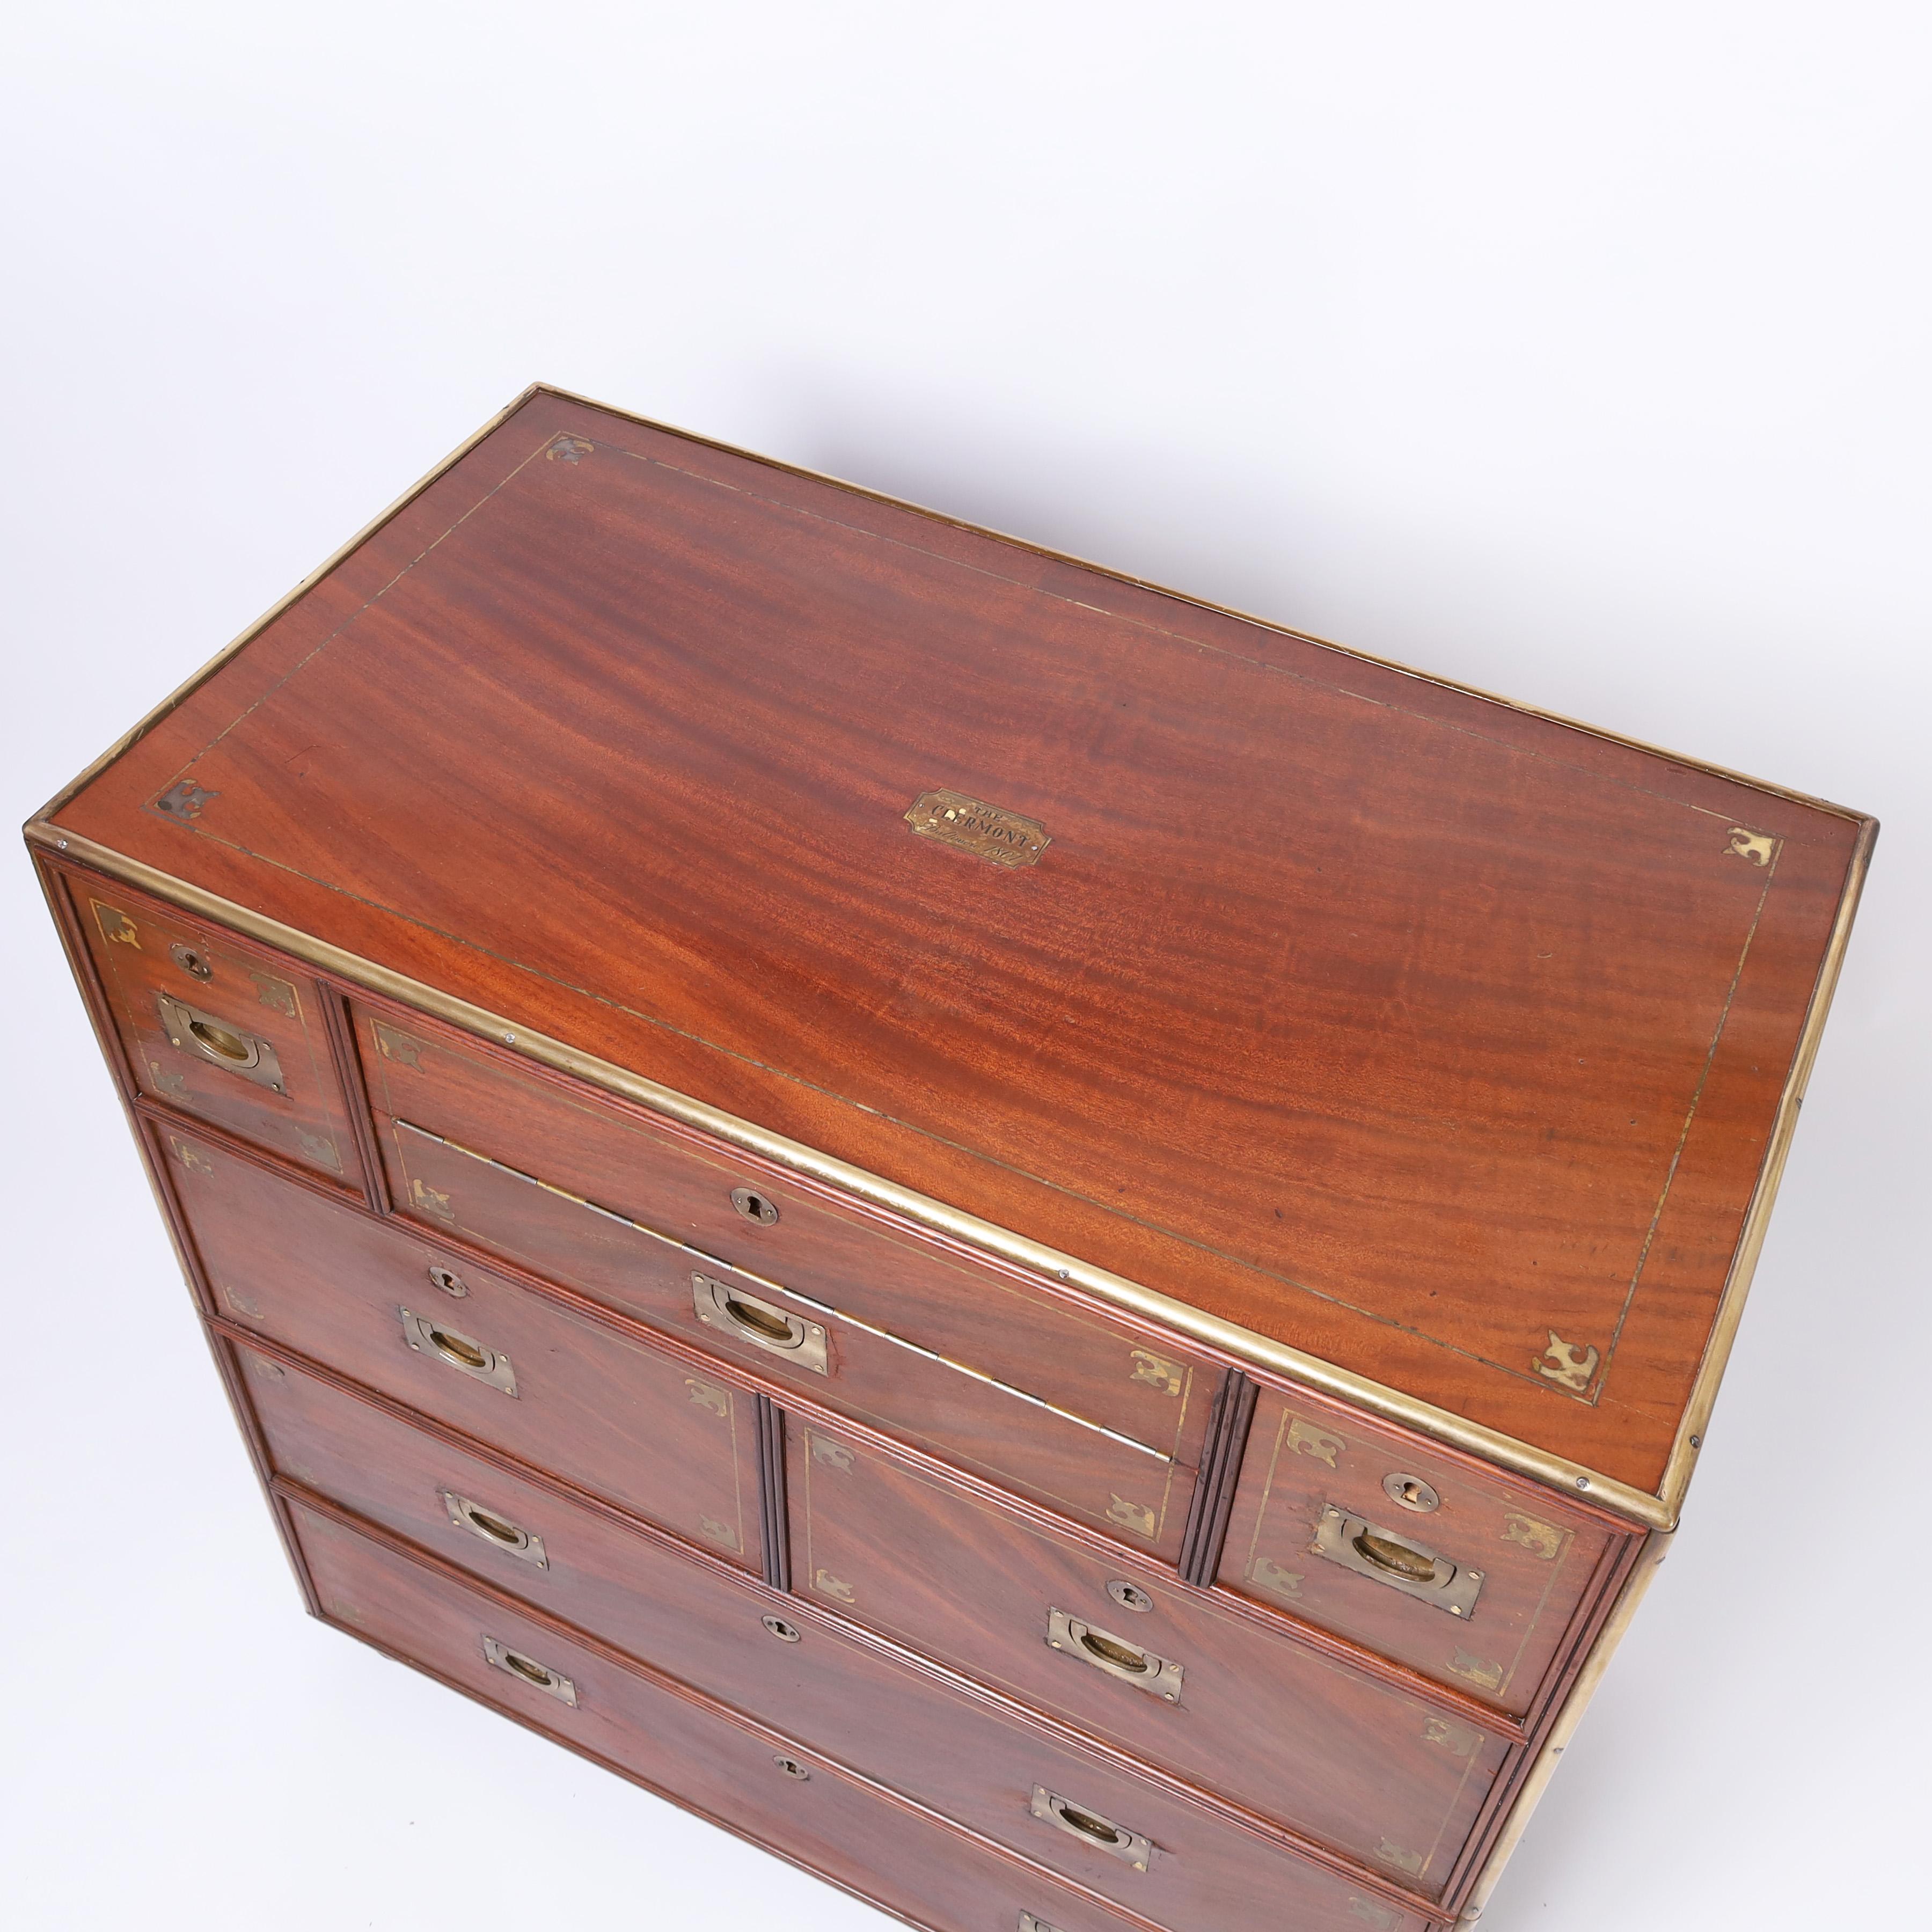 Hand-Crafted Antique Campaign Chest with Desk For Sale